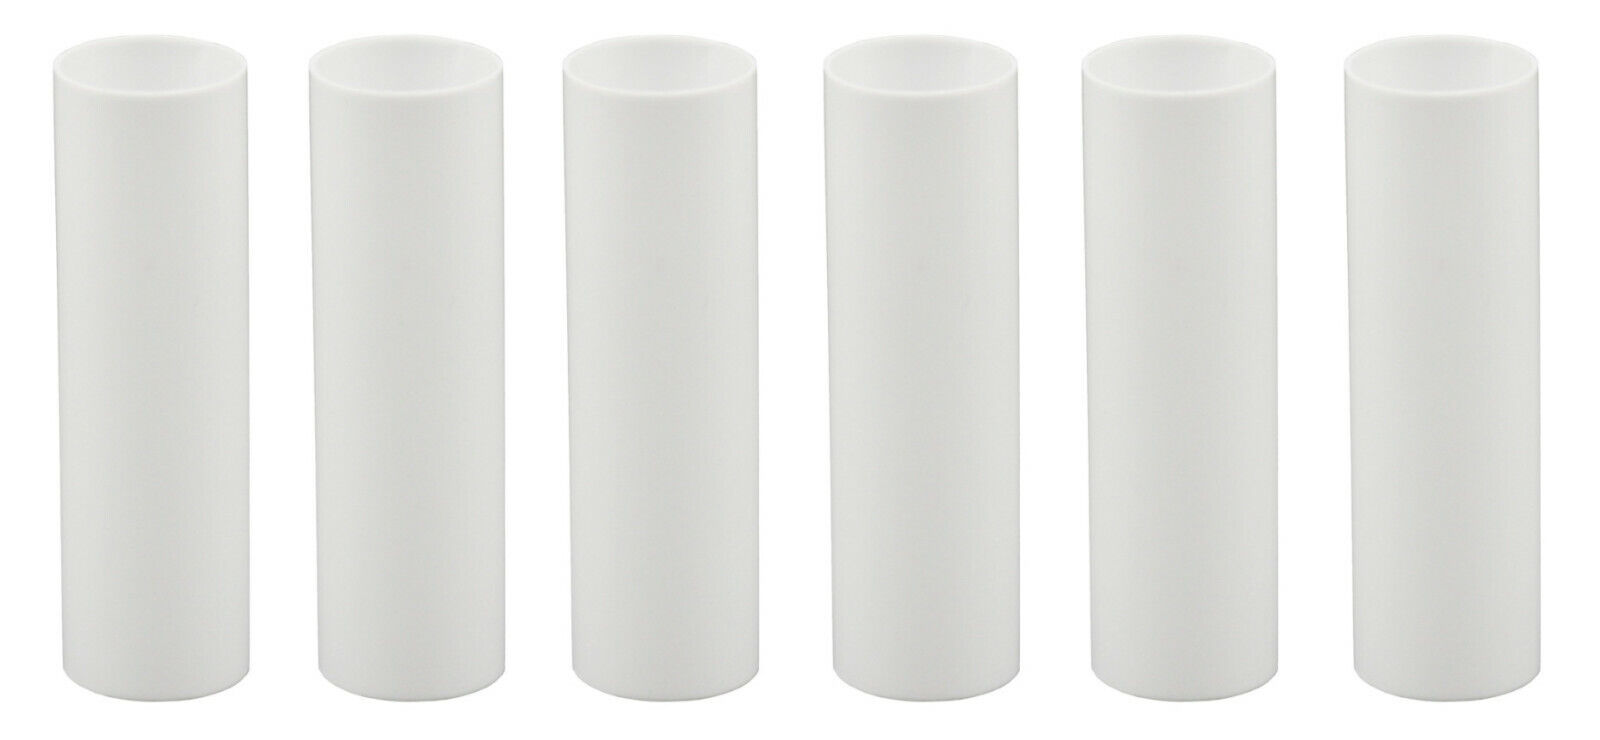 3 Inch White Plastic Candle Cover For Candelabra Base Lamp Sockets, 6 Pieces